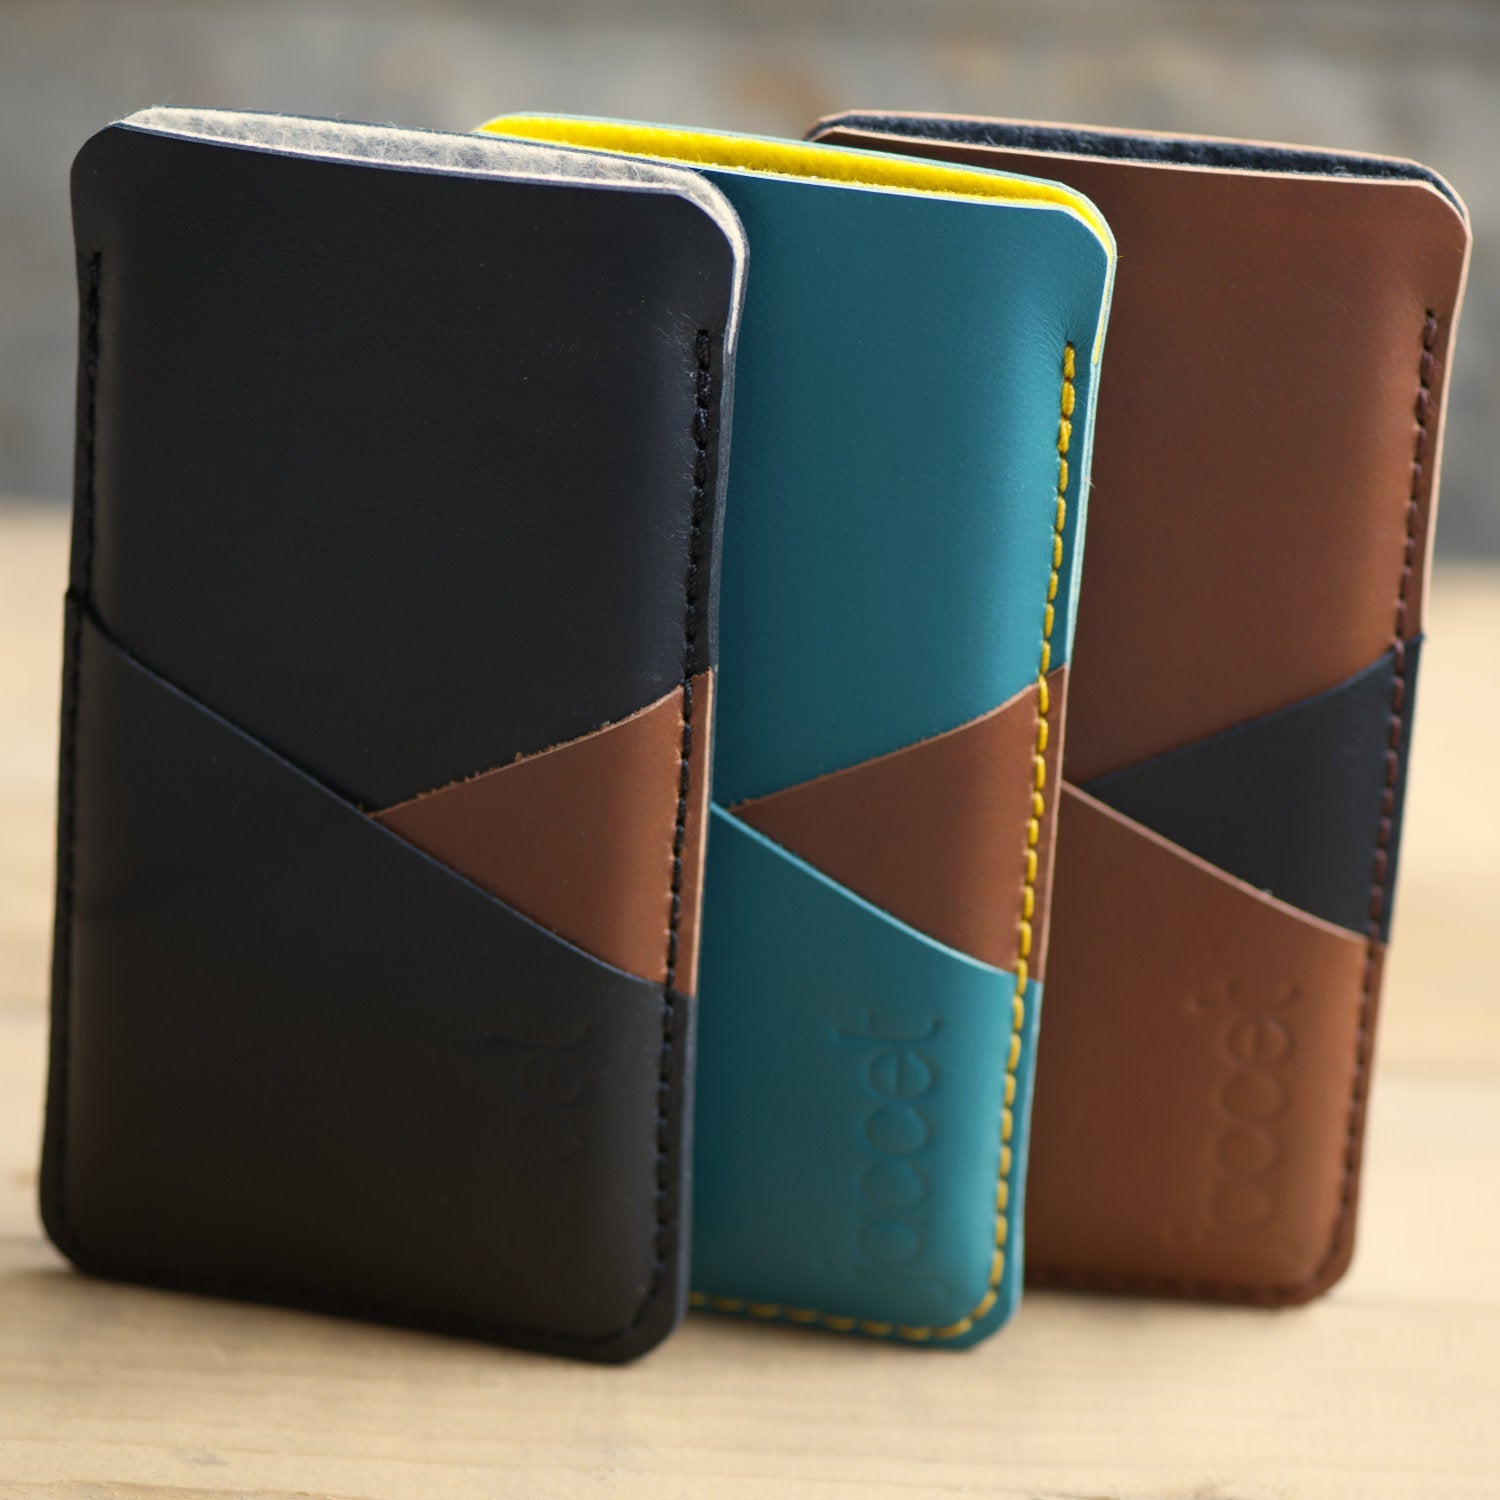 Full-grain leather OnePlus sleeve - Black leather with two pockets voor cards